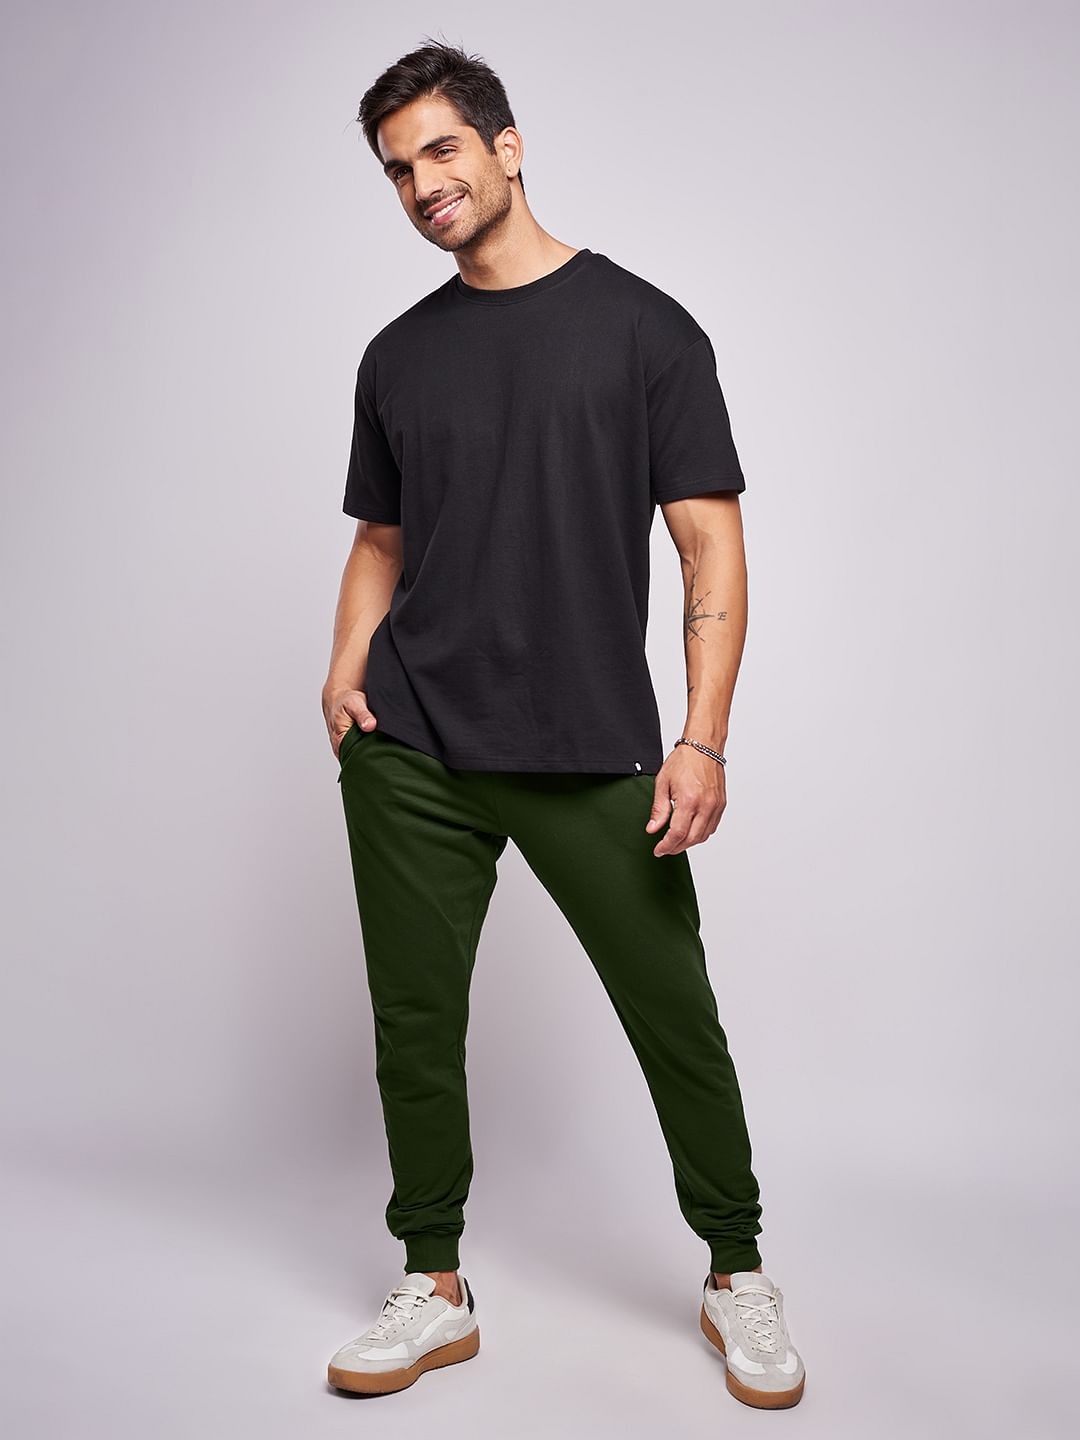 Solids: Olive Green